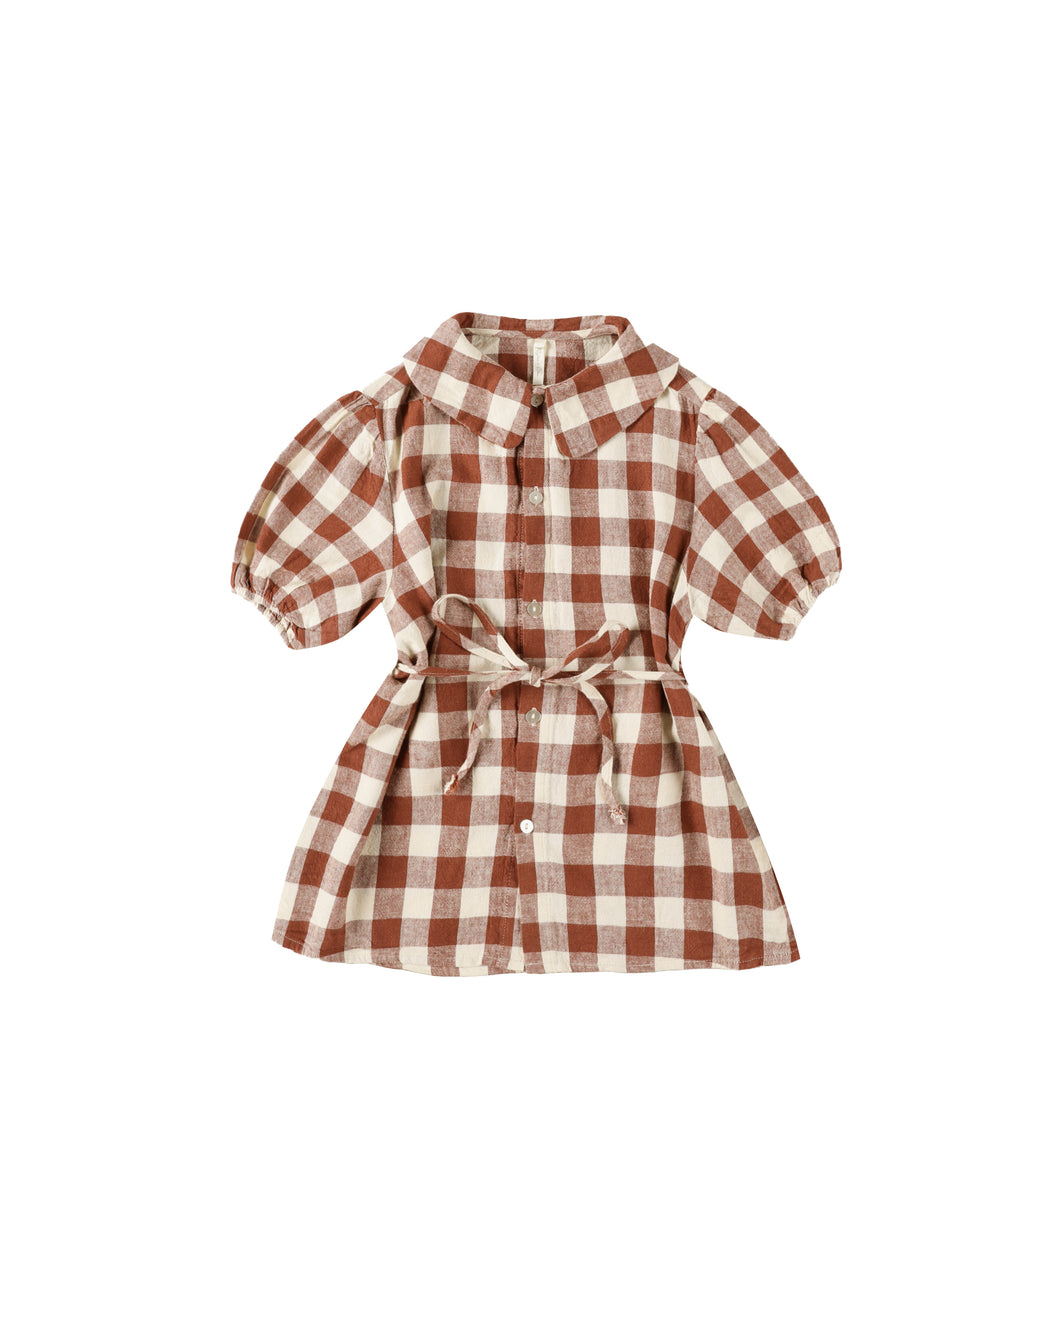 Olive Dress - Ruby Plaid SIZE 8/9, 10/12 YEARS